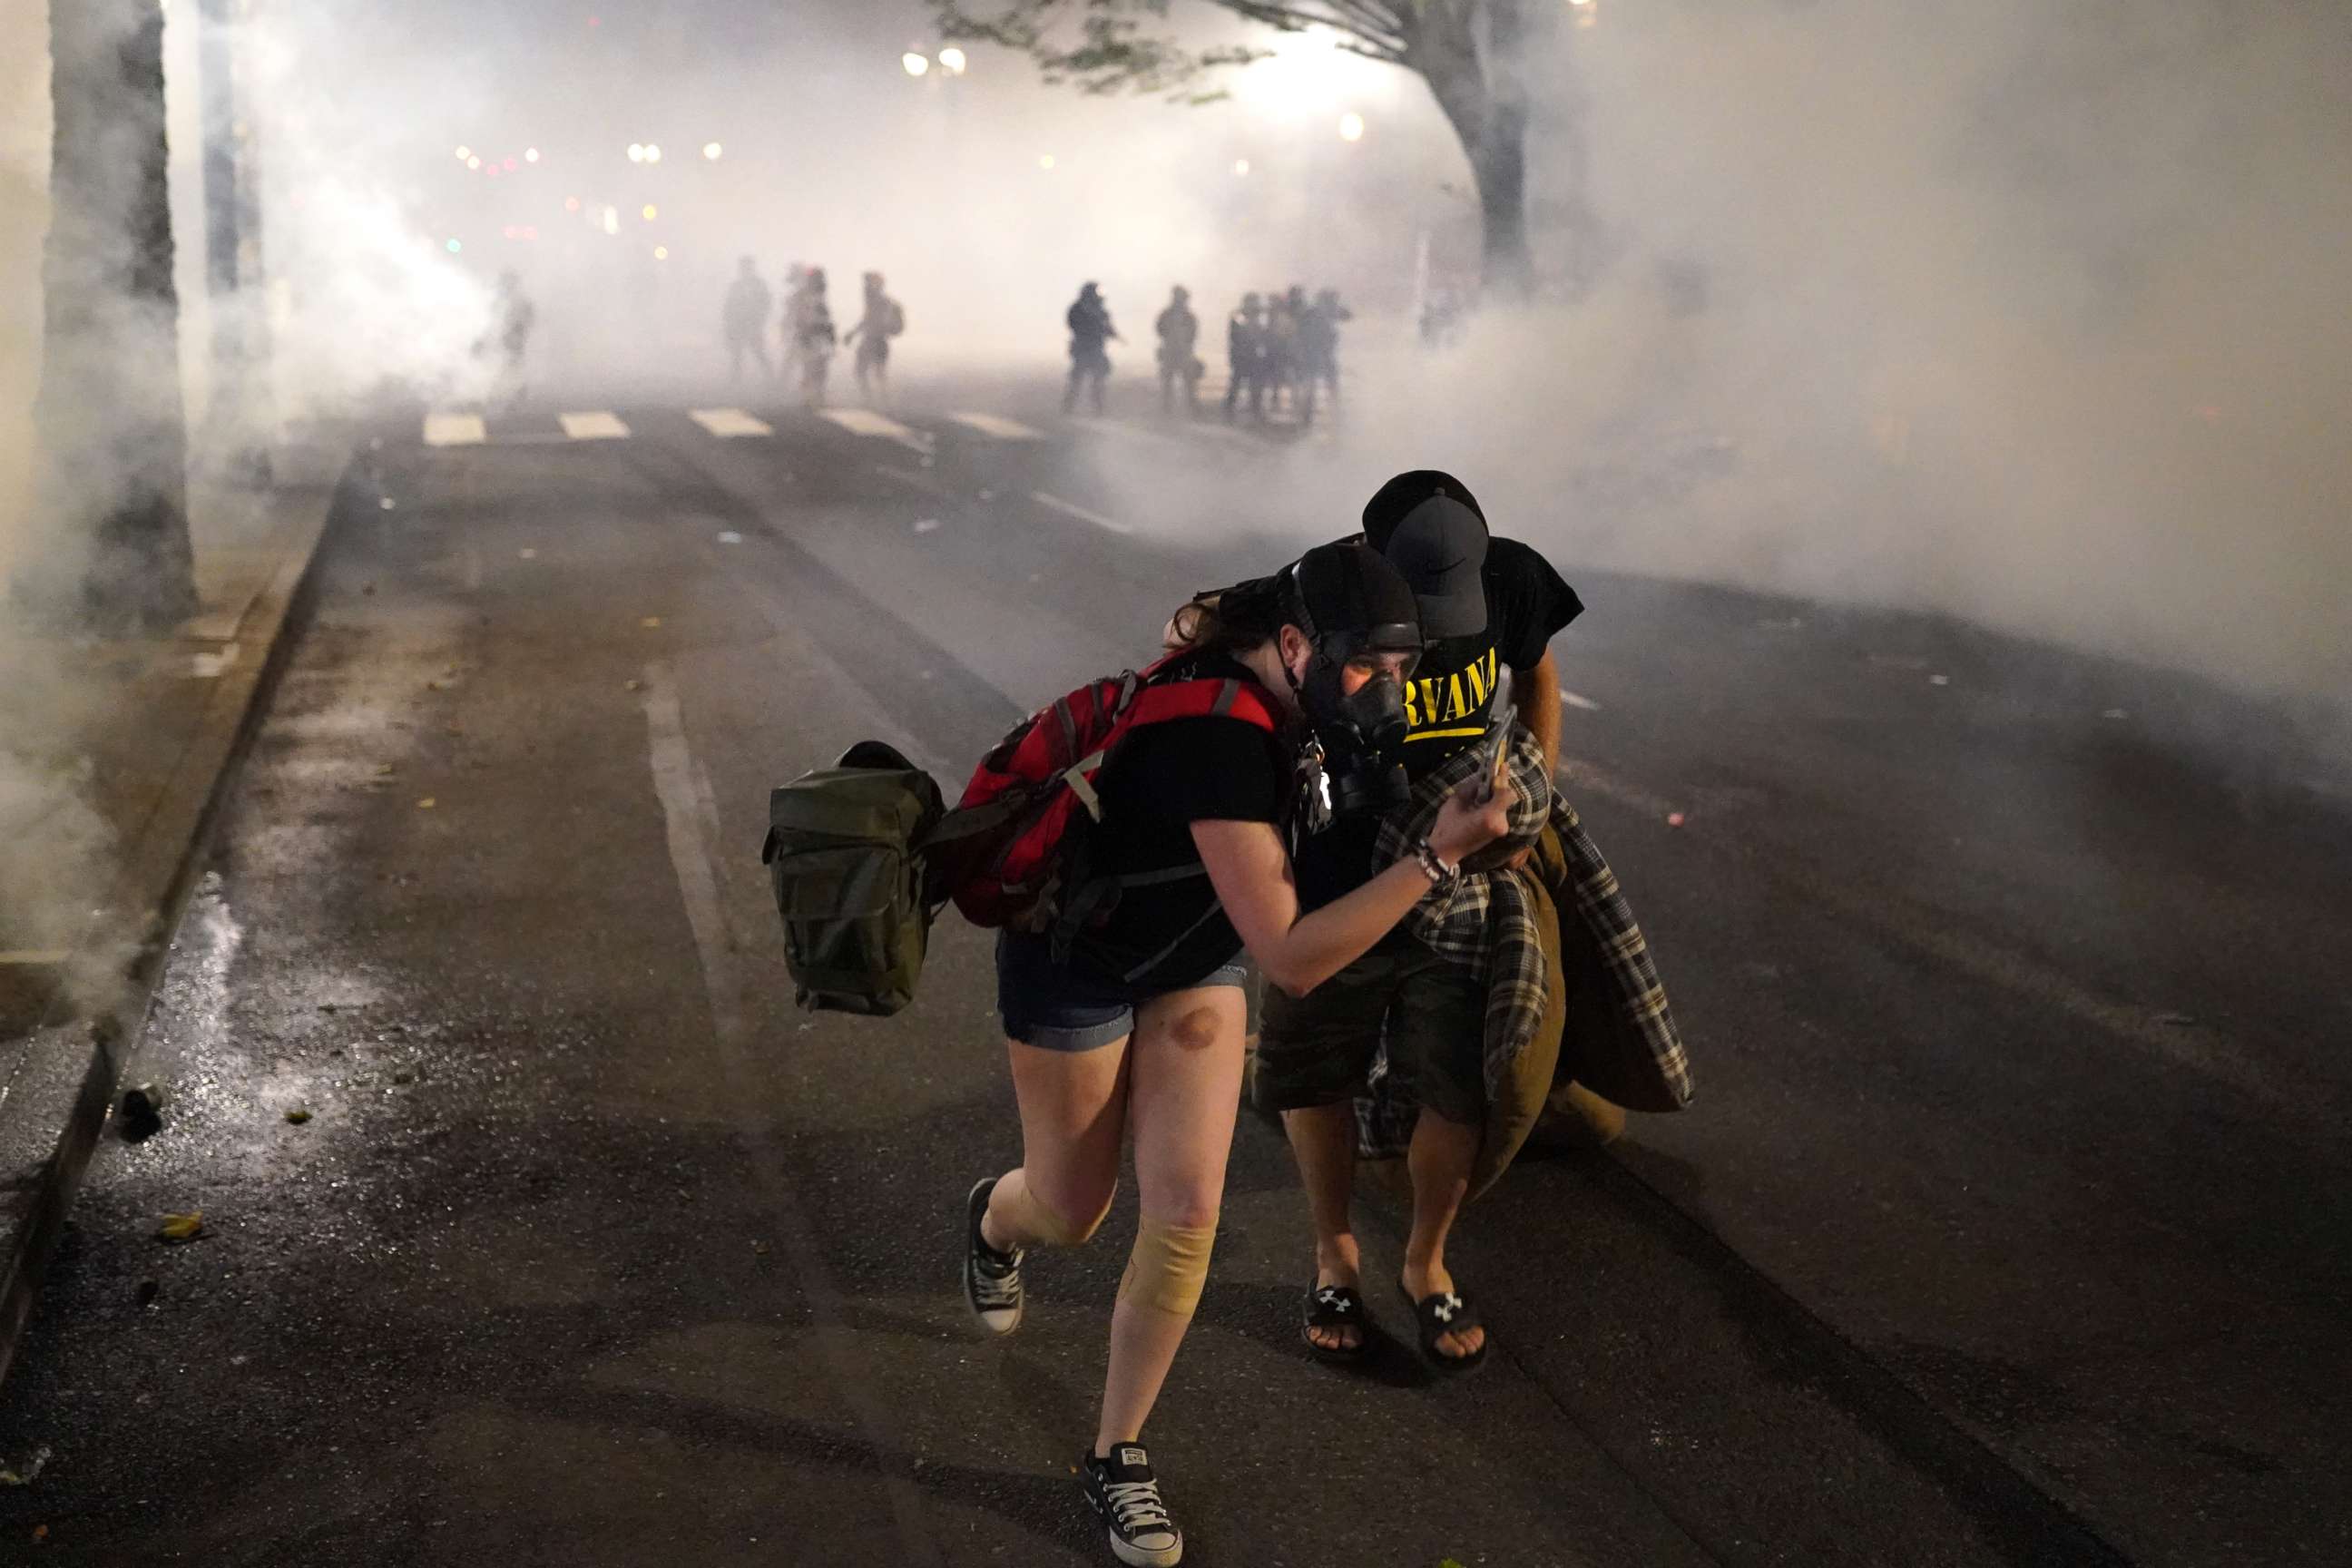 PHOTO: Two protesters flee through tear gas after federal officers dispersed a crowd of about a thousand at the Mark O. Hatfield U.S. Courthouse on July 21, 2020 in Portland, Ore.